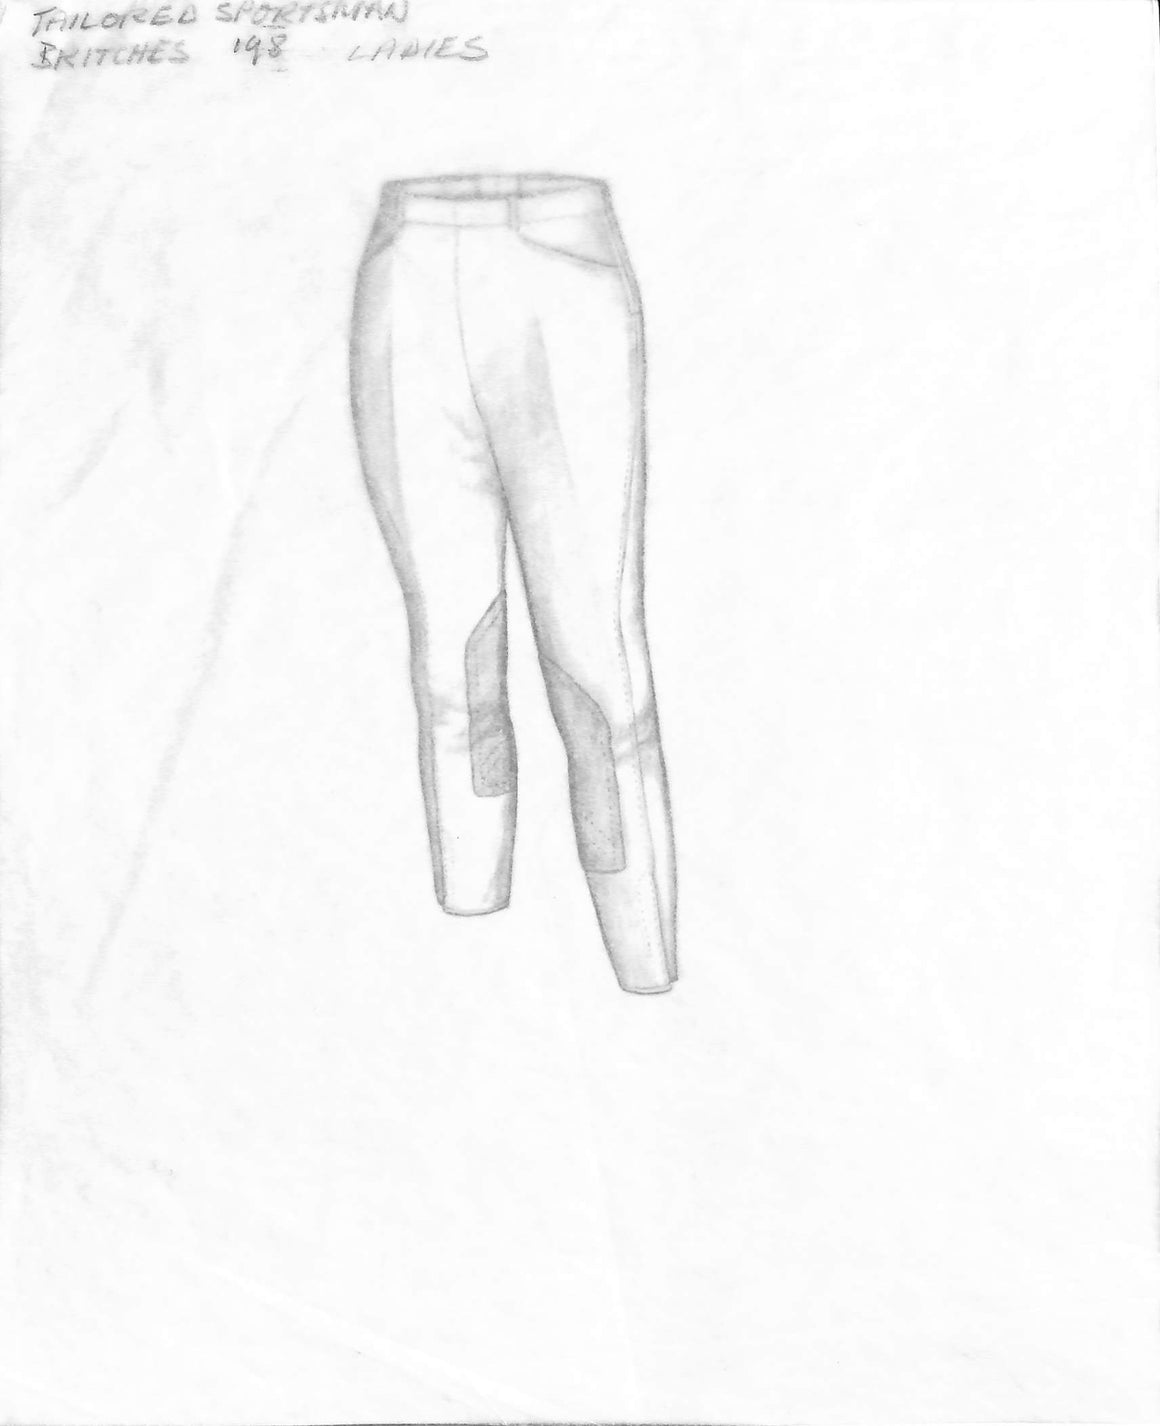 Tailored Sportsman Britches Graphite Drawing